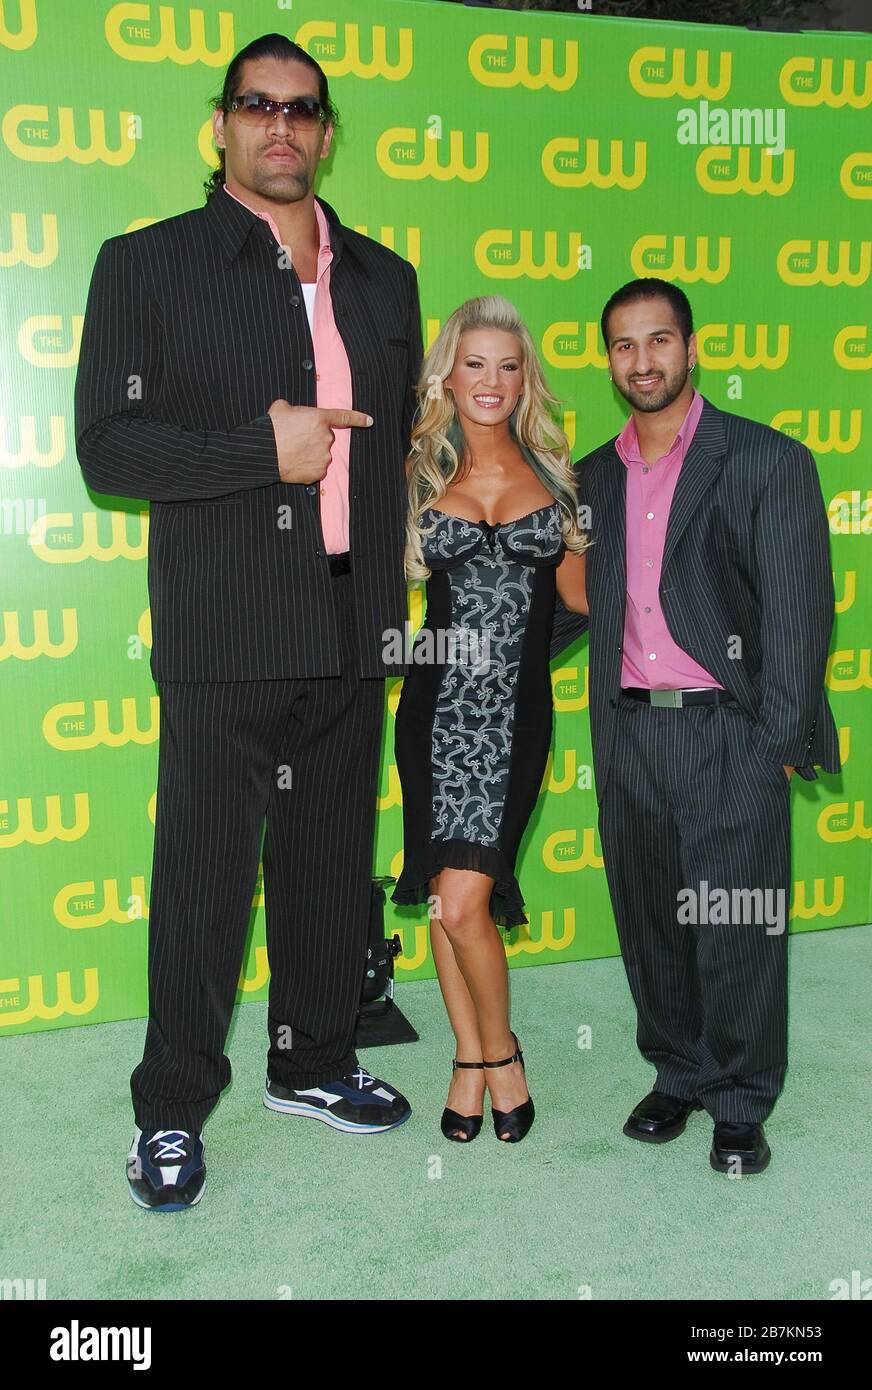 The Great Khali, Ashley and Daivari of 'Friday Night Smackdown' at The CW Network Launch Party held at the Warner Bros. Studios - Main Lot in Burbank, CA. The event took place on Monday, September 18, 2006.  Photo by: SBM / PictureLux - File Reference # 33984-6973SBMPLX Stock Photo